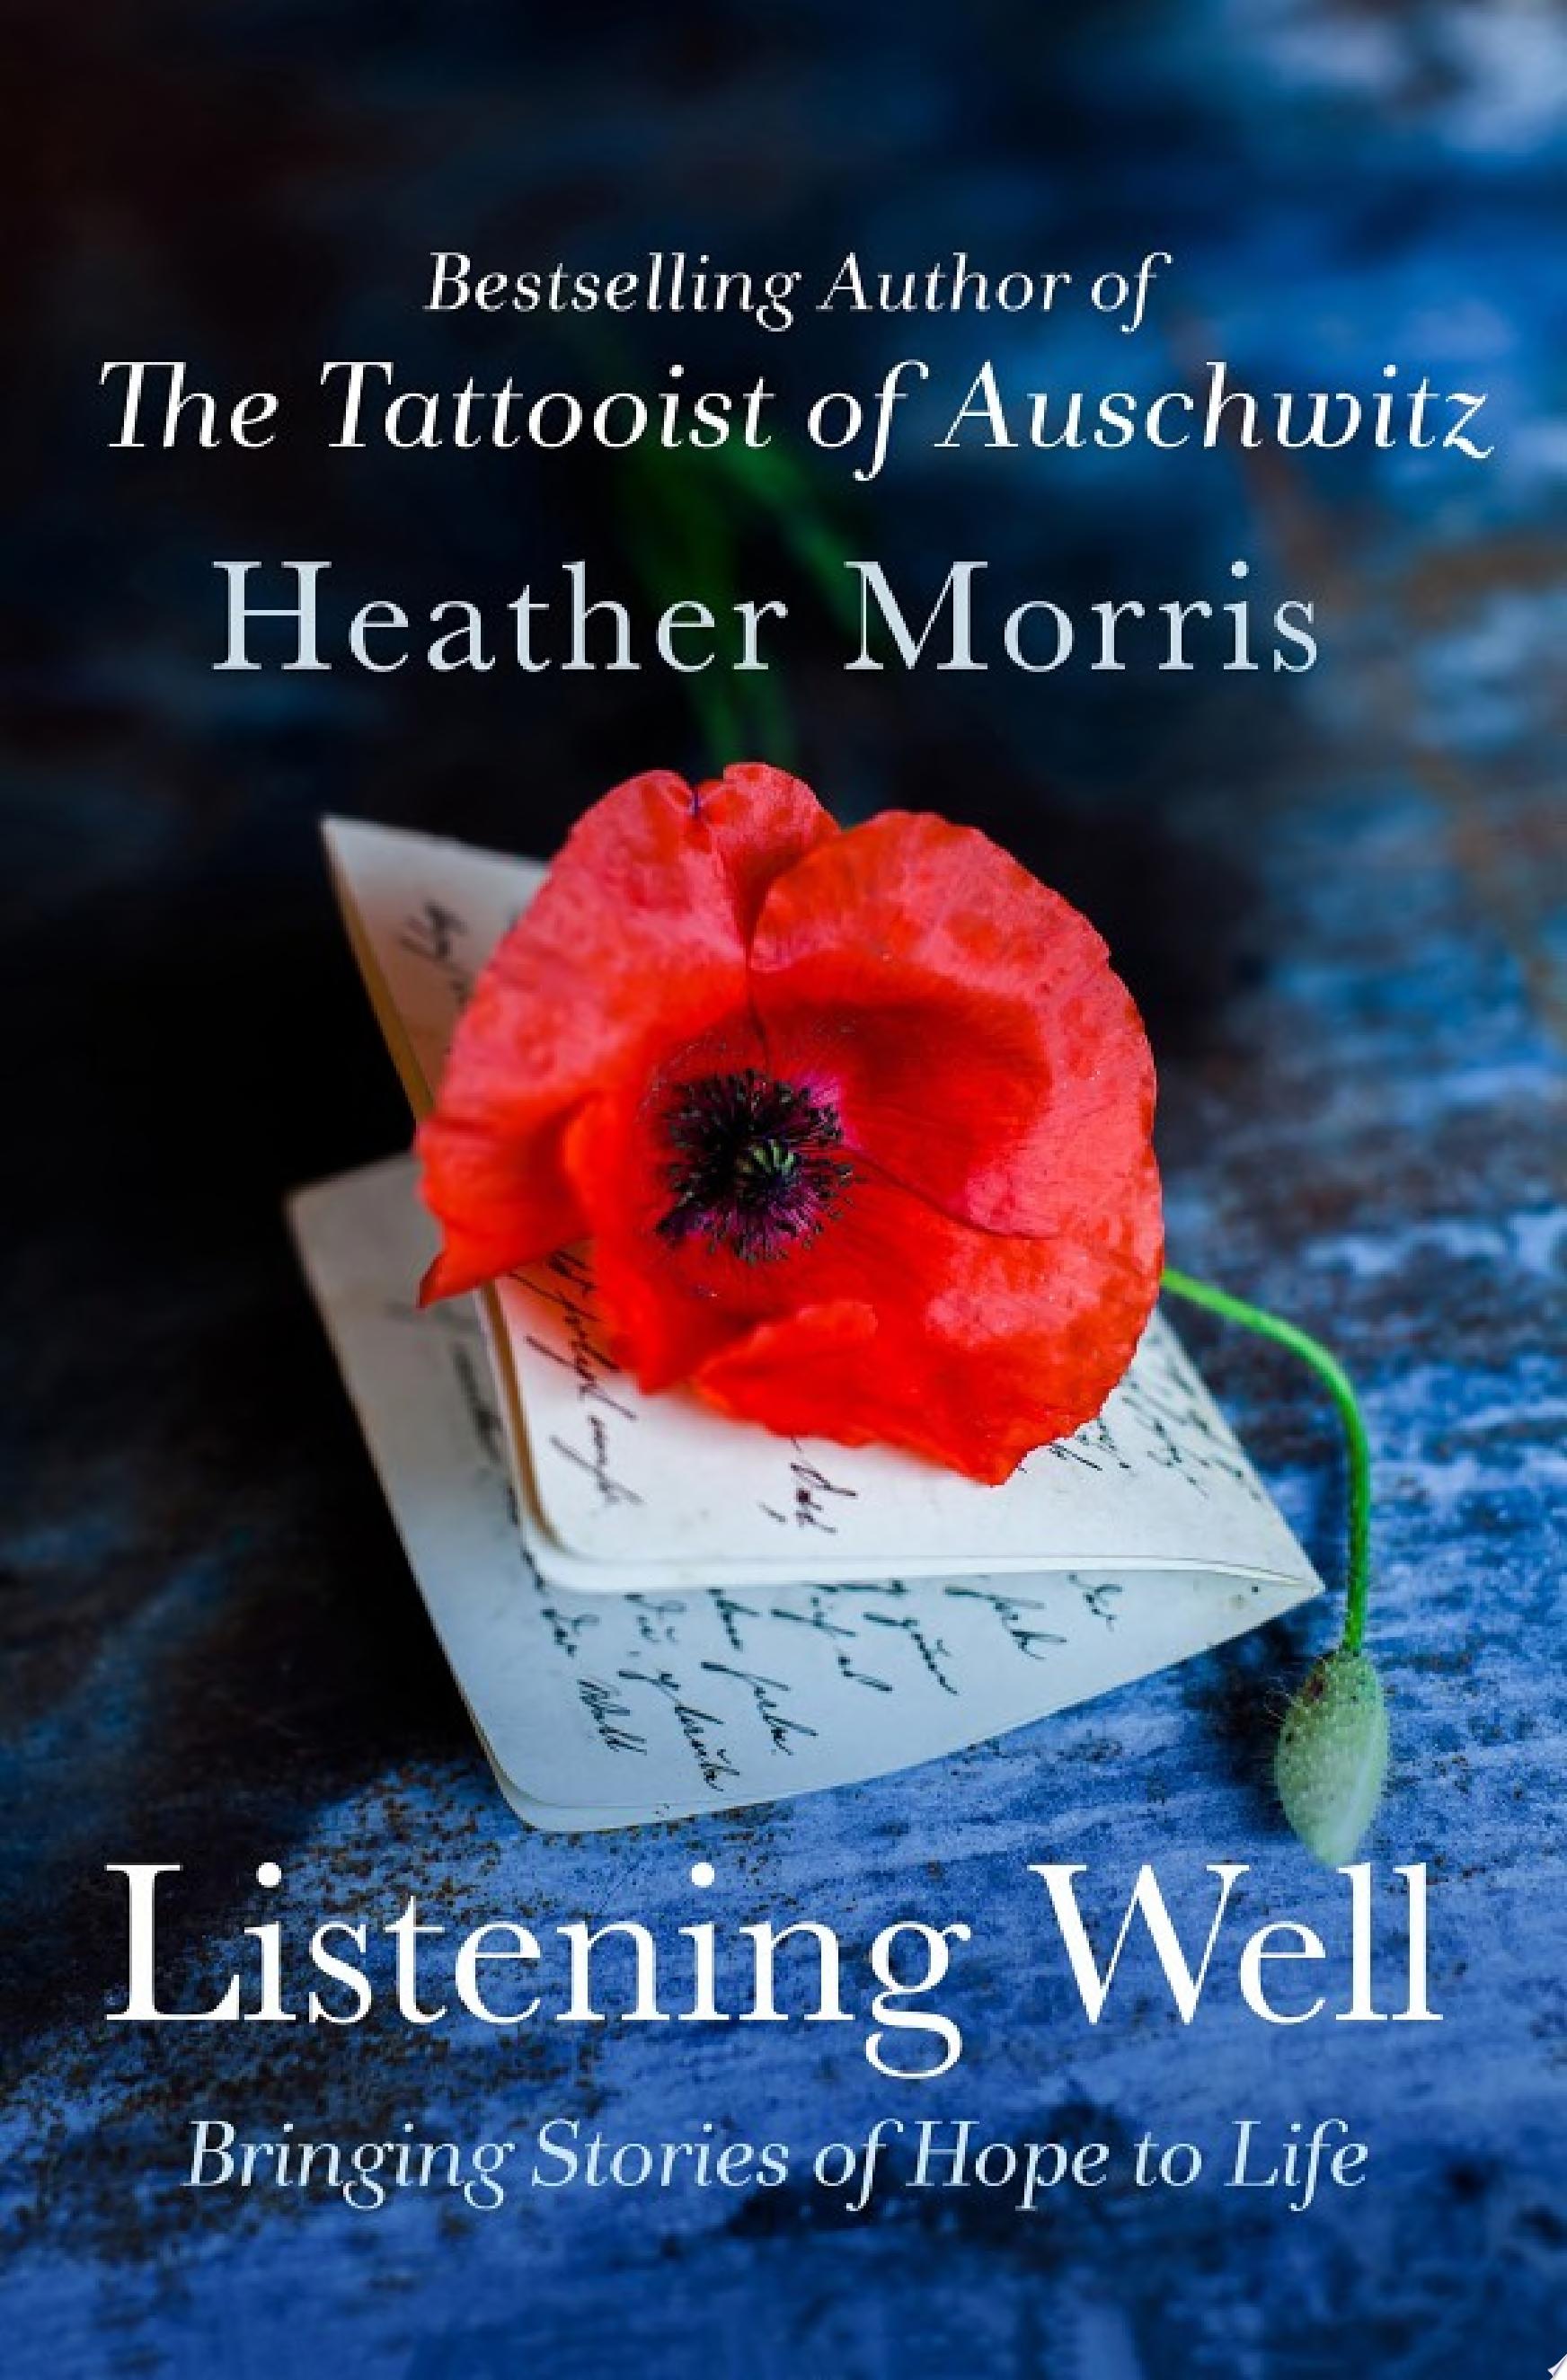 Image for "Listening Well"